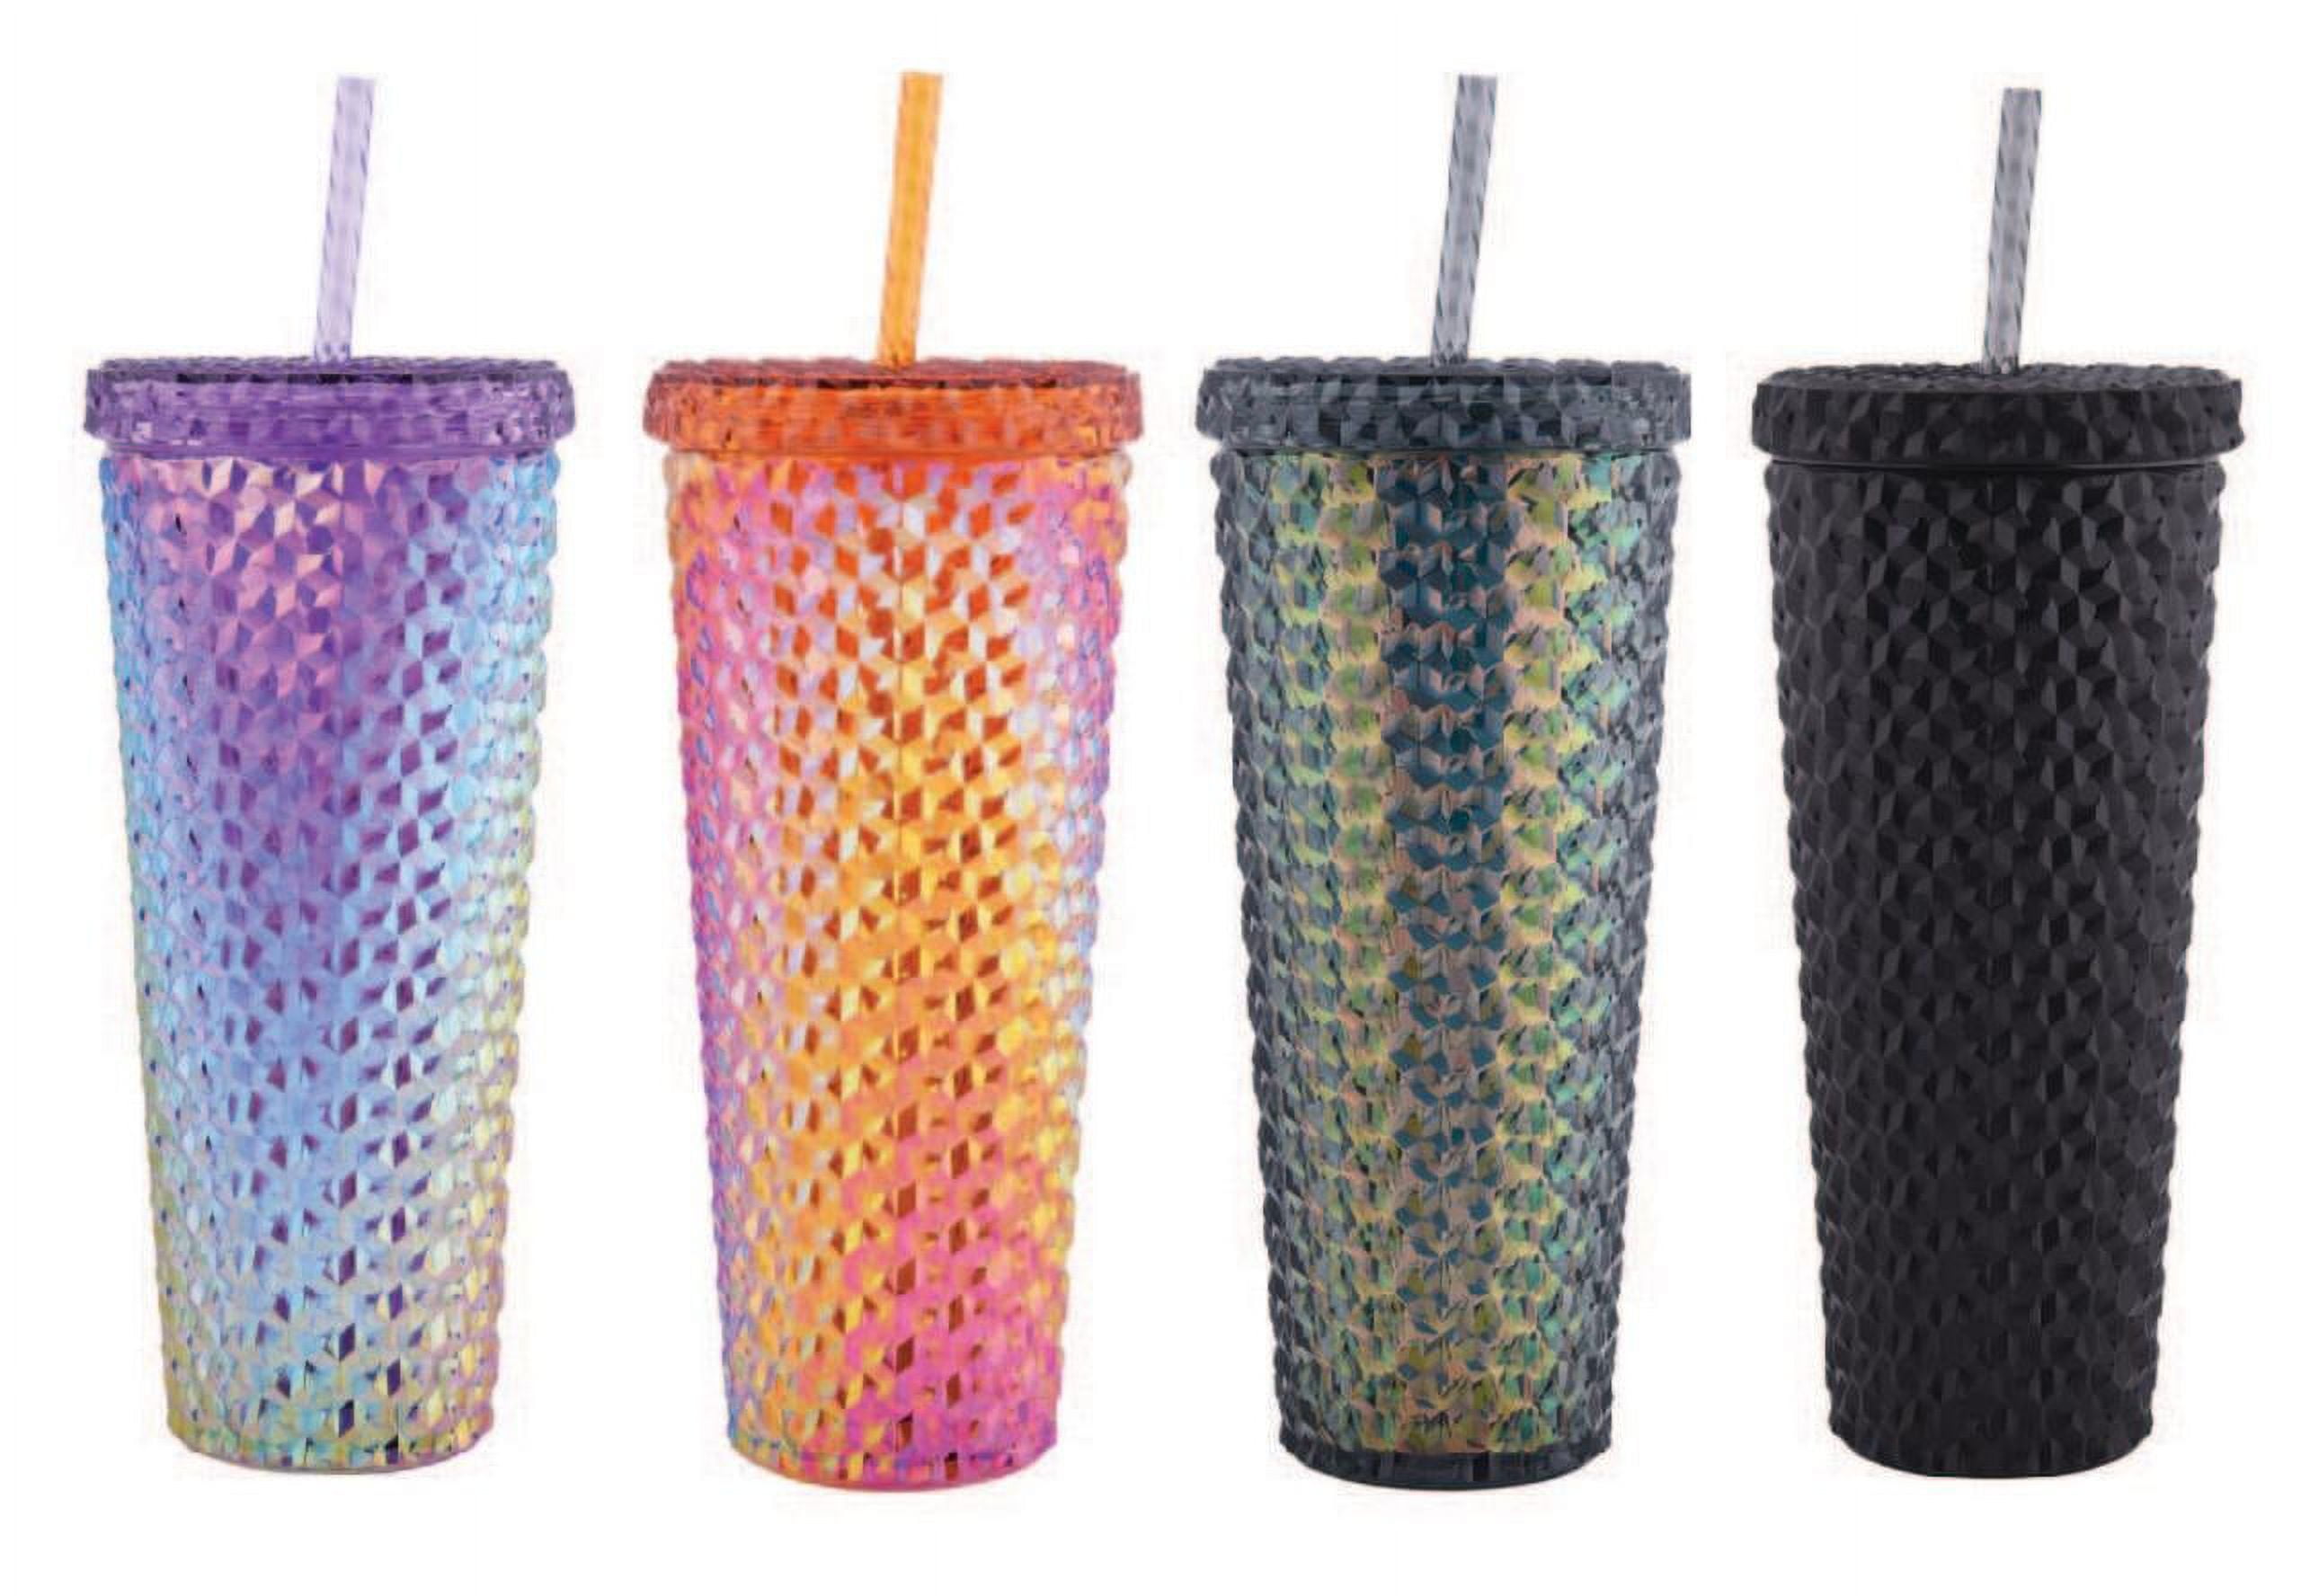 Hemoton Straw Lid Cup Water Tumbler with Straw Lid Double Layer Insulated  Water Cup Glitter Star Wat…See more Hemoton Straw Lid Cup Water Tumbler  with